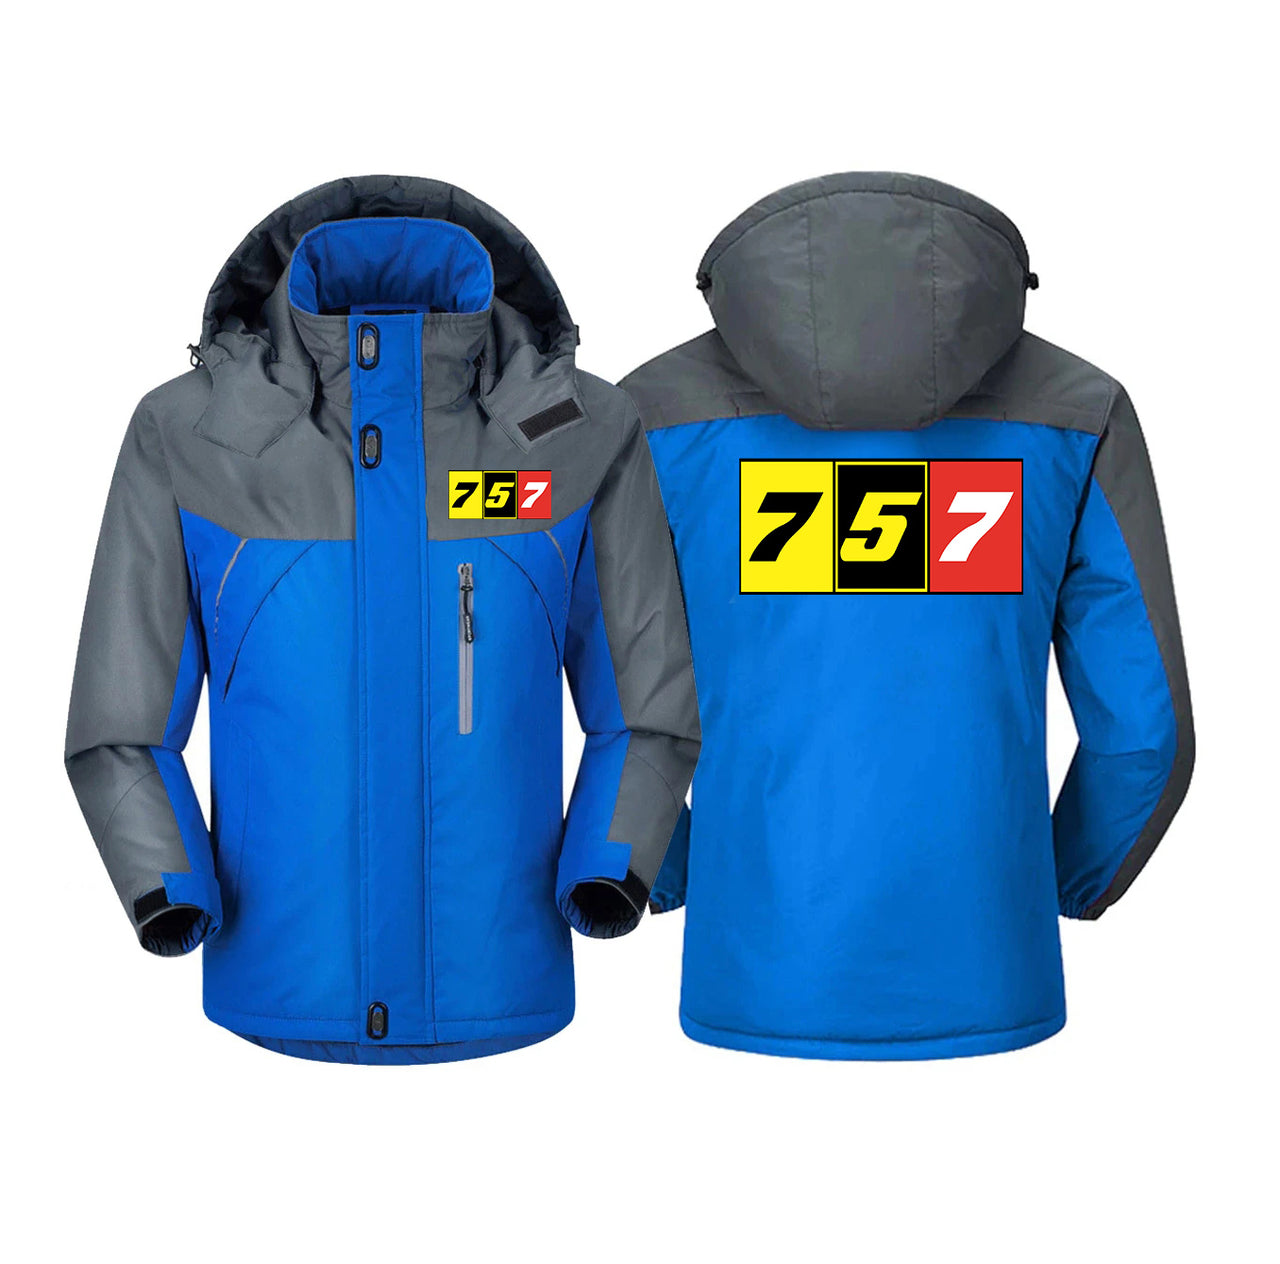 Flat Colourful 757 Designed Thick Winter Jackets